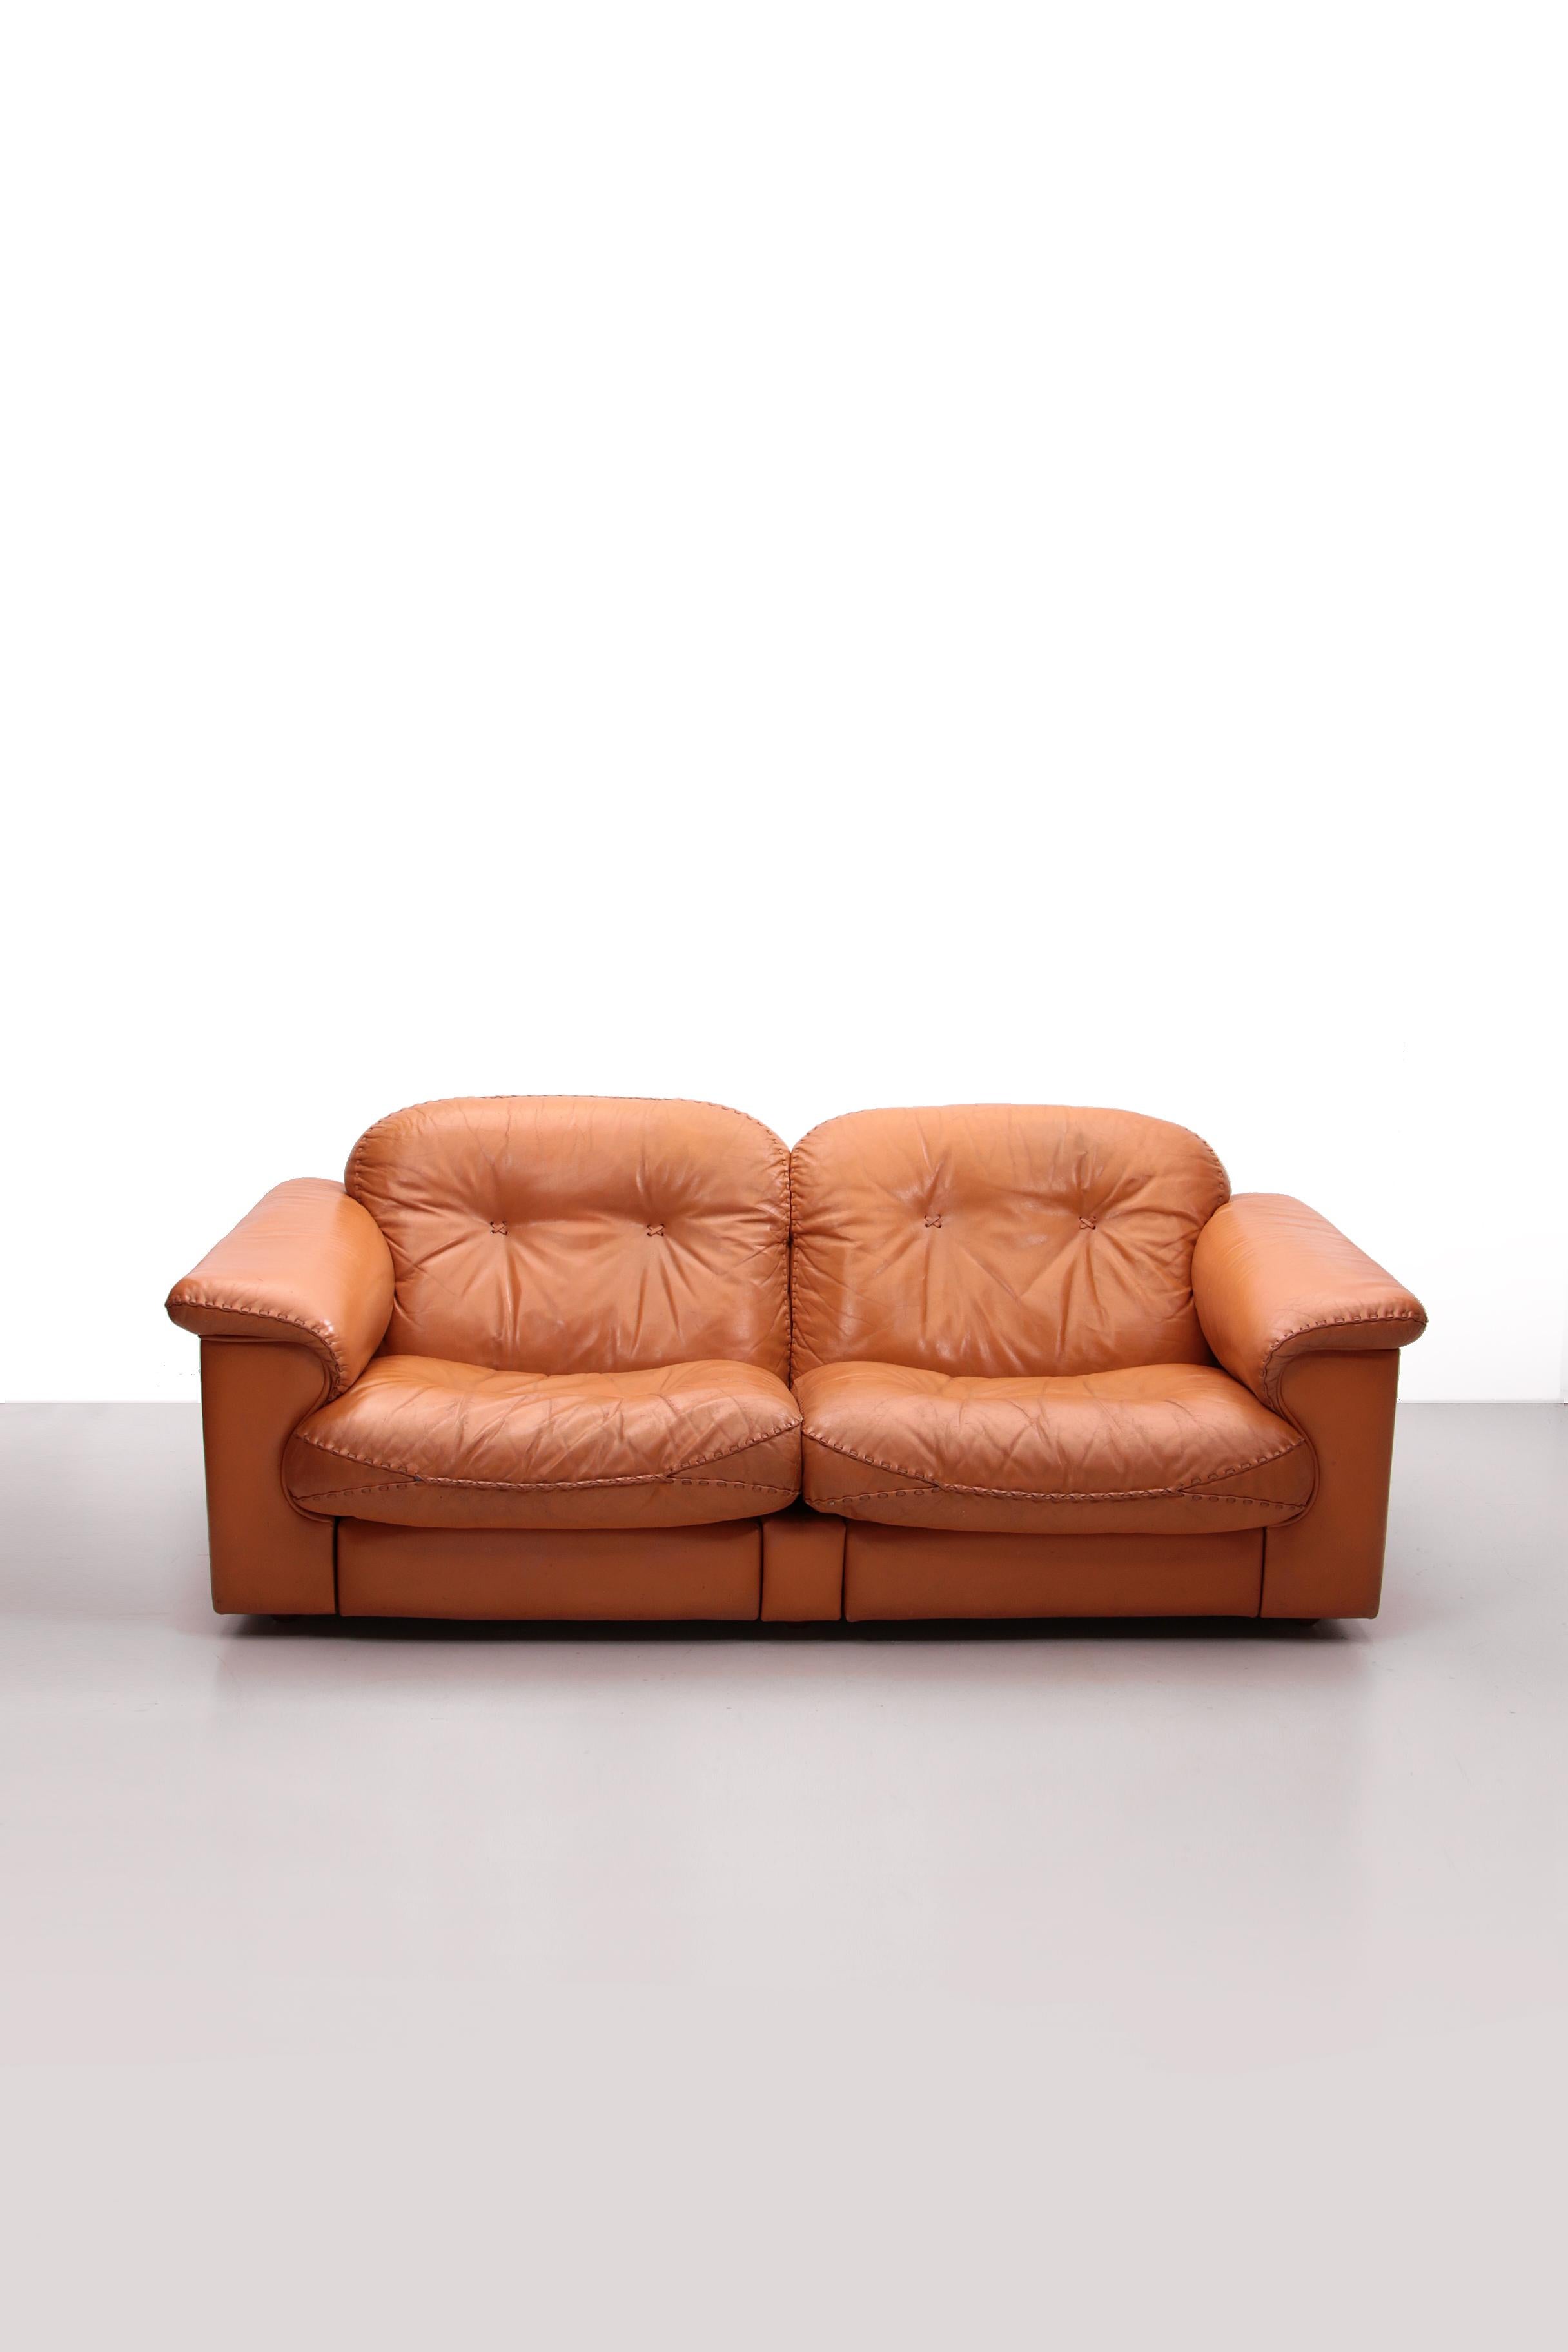 Scandinavian Modern De Sede DS101 Two Seater Leather and Gognac Color, 1970 For Sale